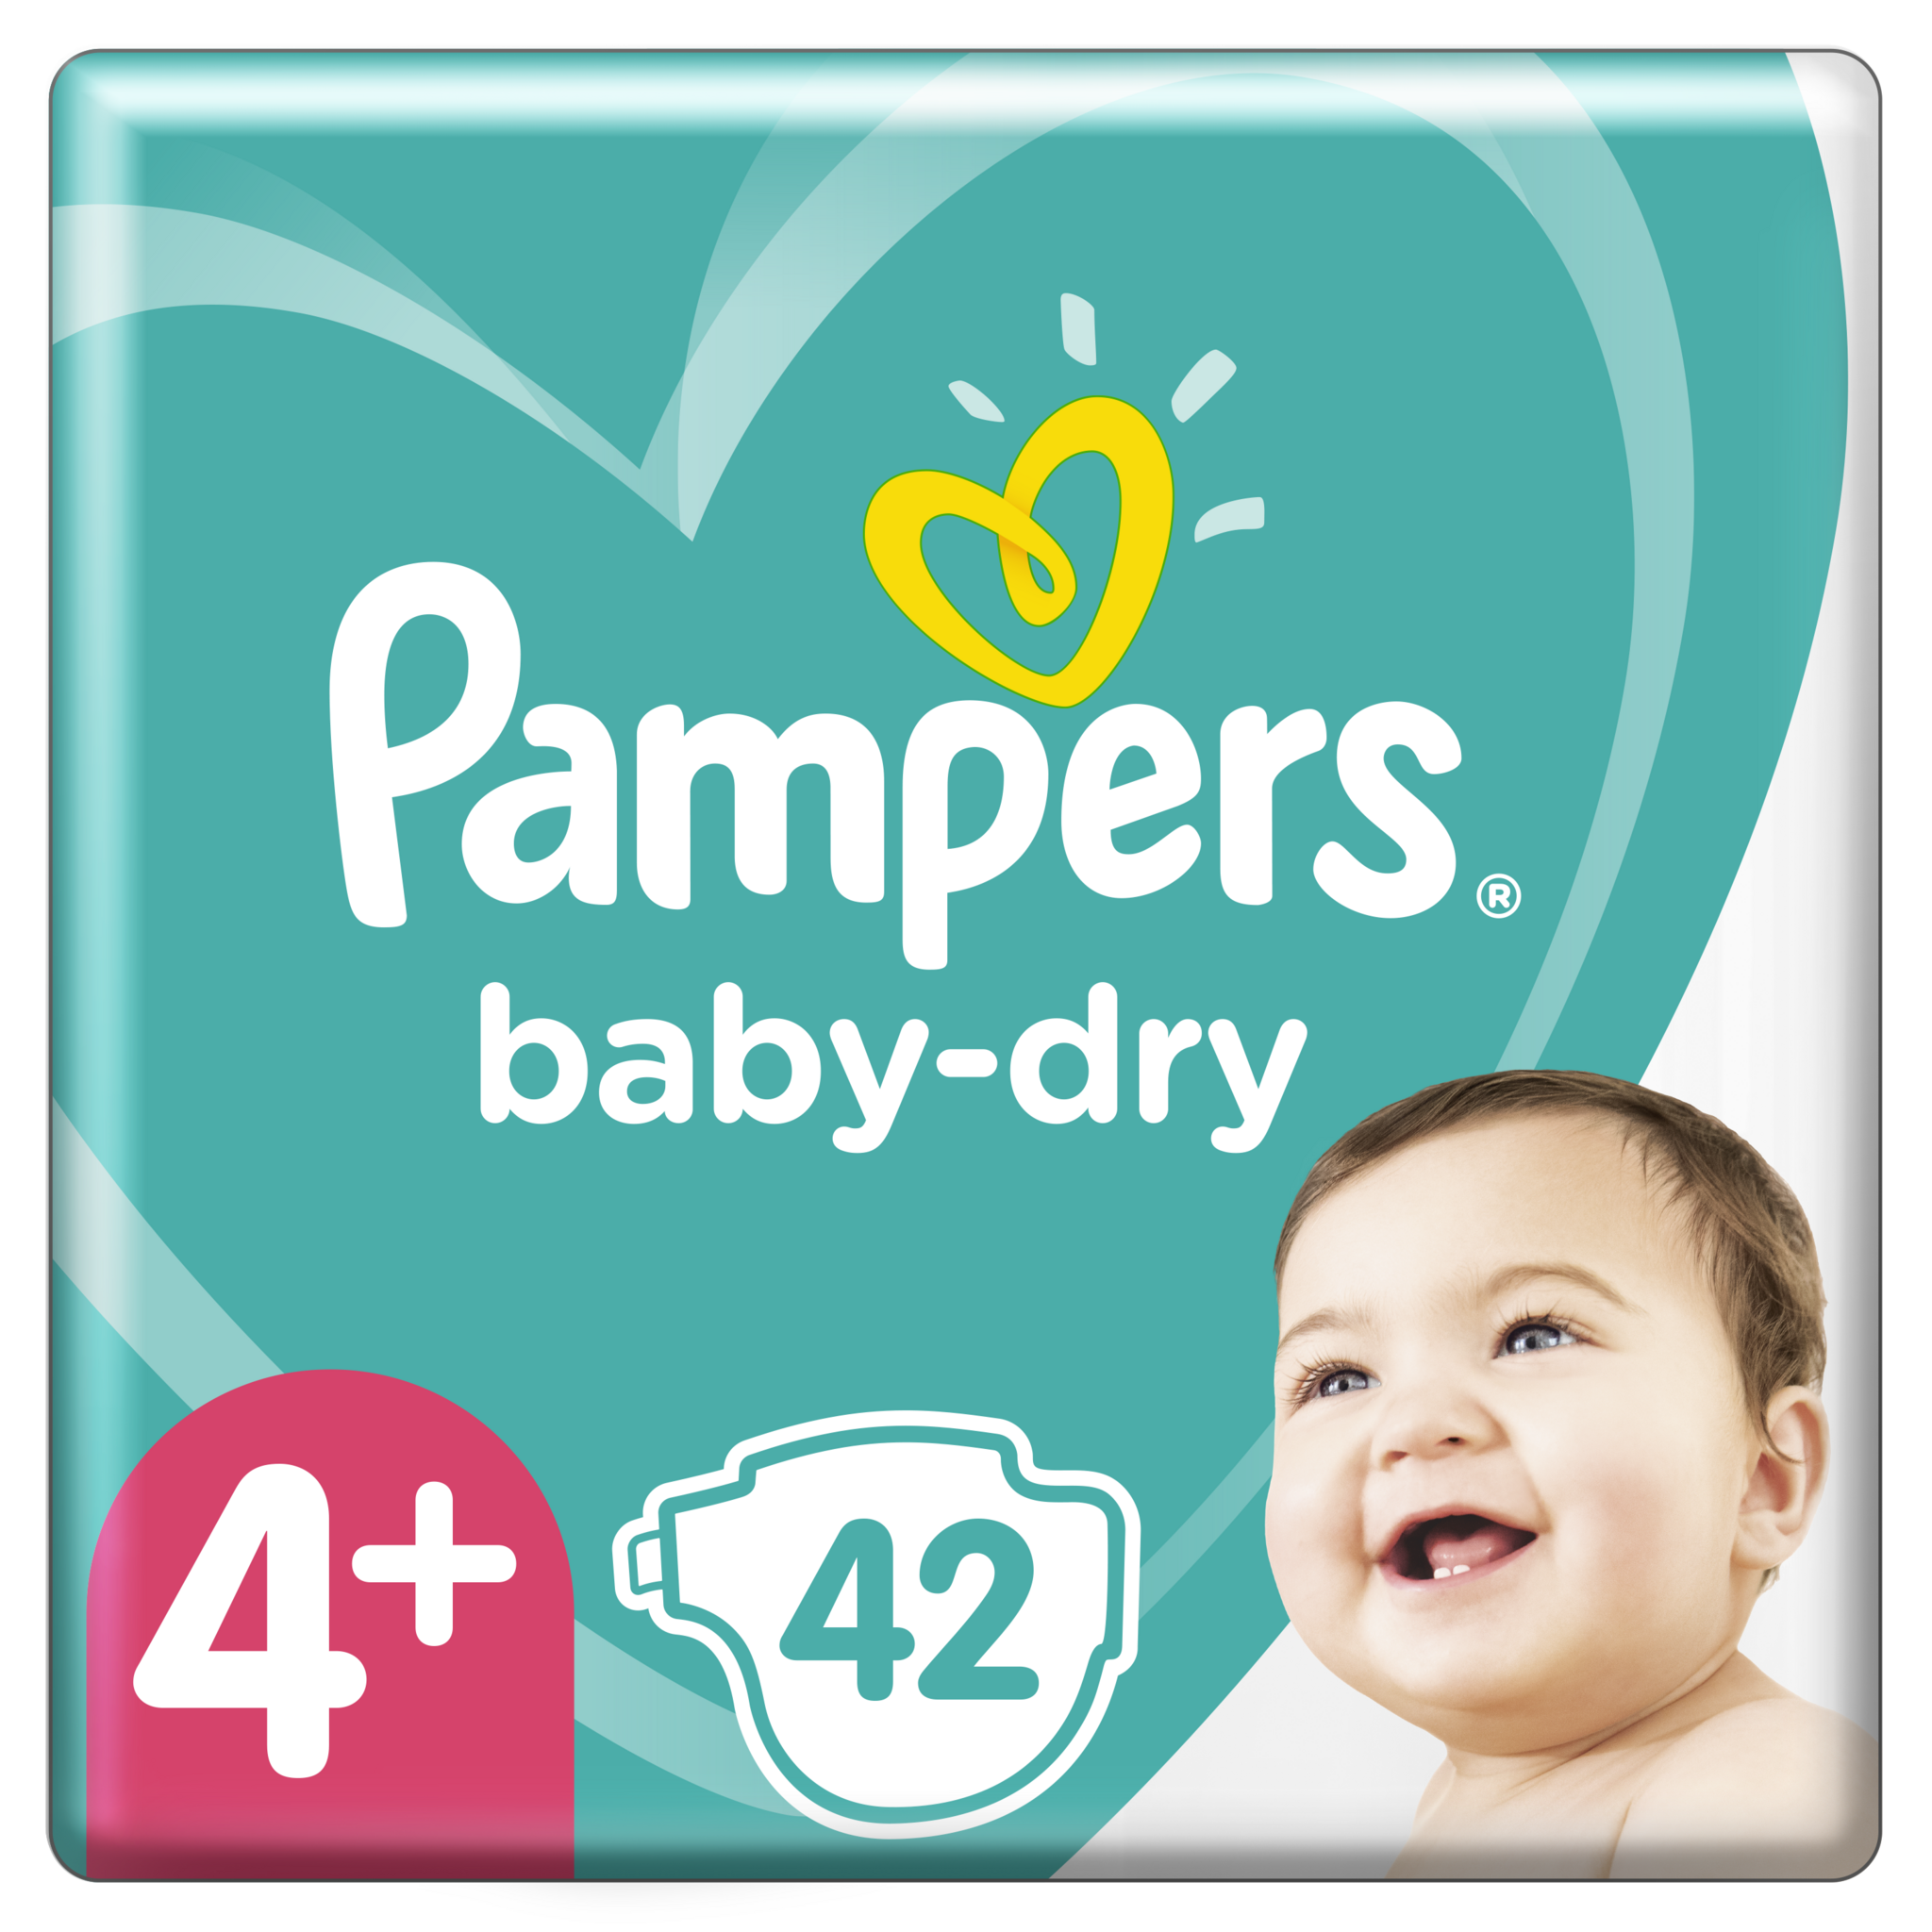 PAMPERS Baby-dry géant couches taille 4+ (10-15kg) 42 couches pas cher 